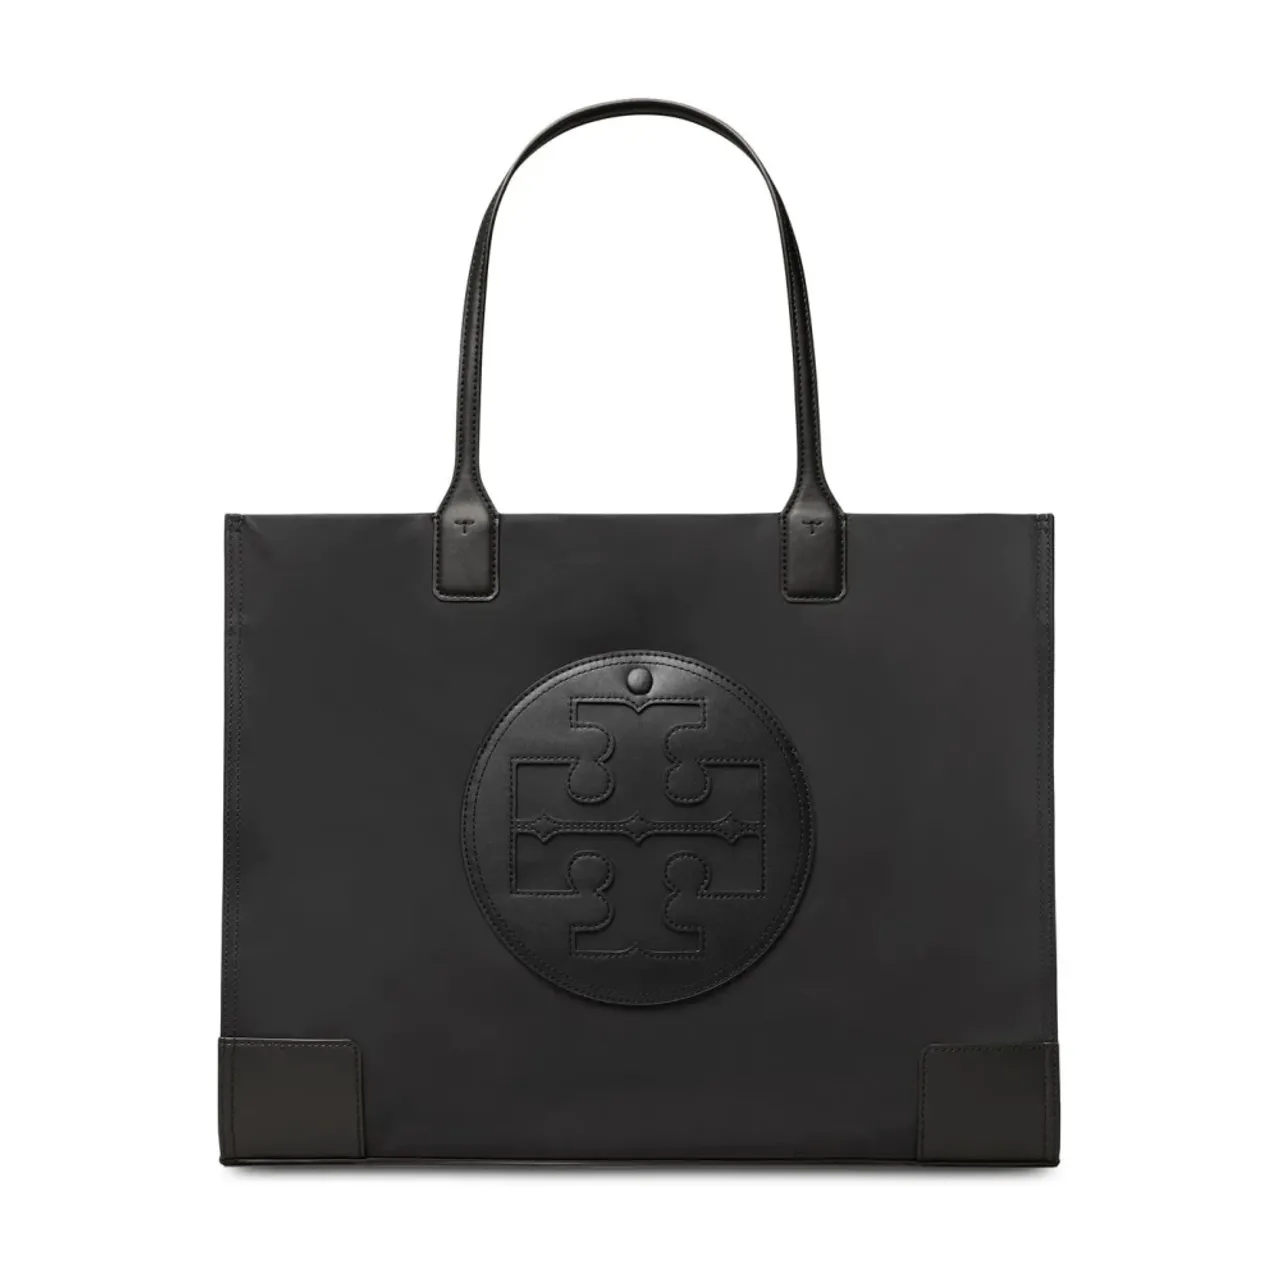 Tory Burch , Blackylon Tote Bag with Leather Details ,Black female, Sizes: ONE SIZE